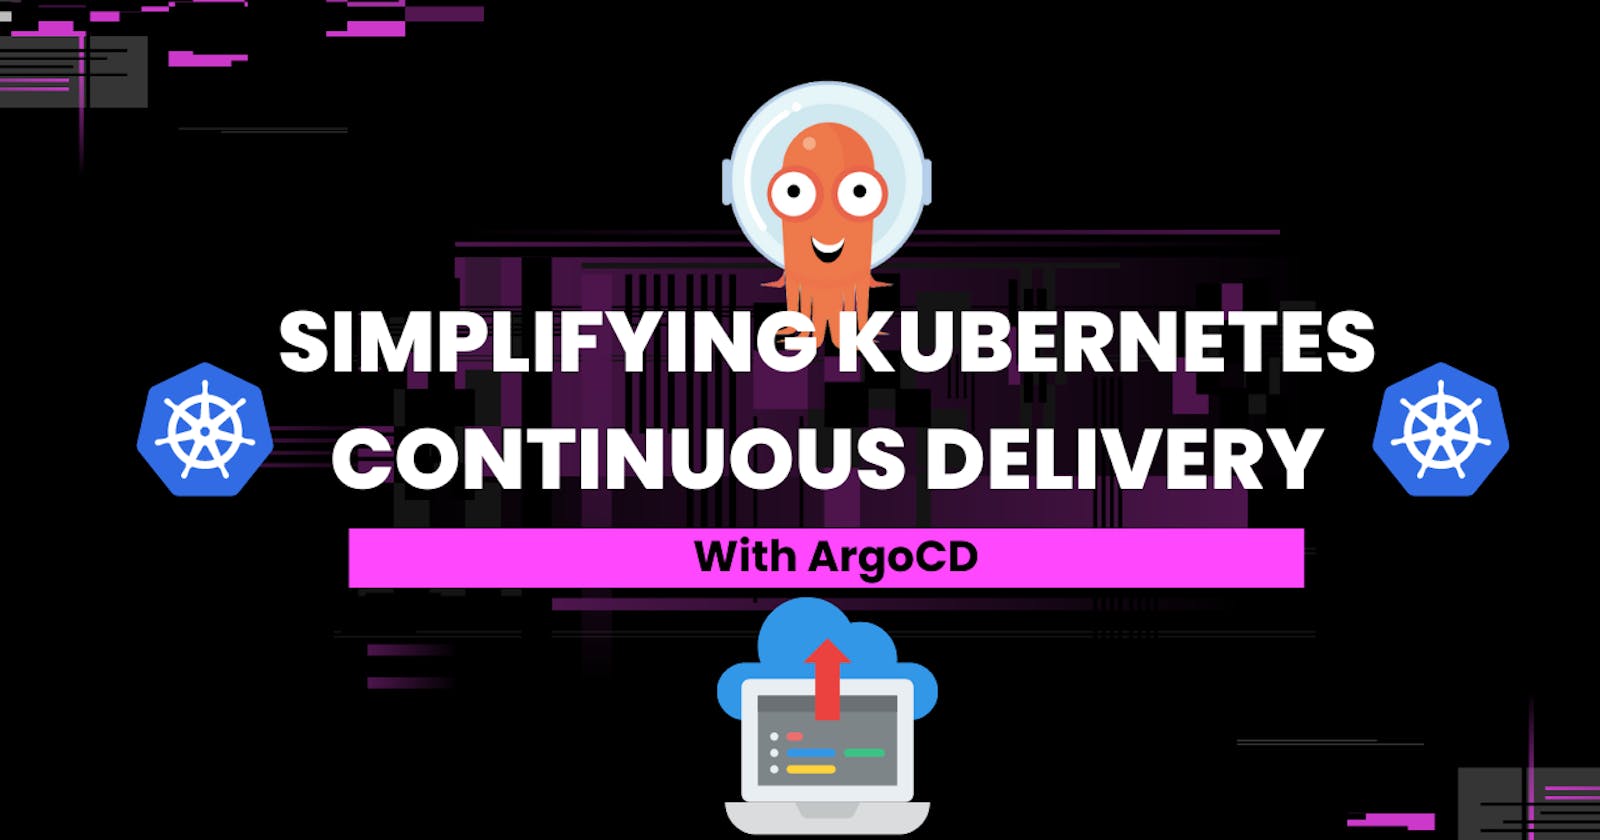 Simplifying Kubernetes Continuous Delivery With ArgoCD